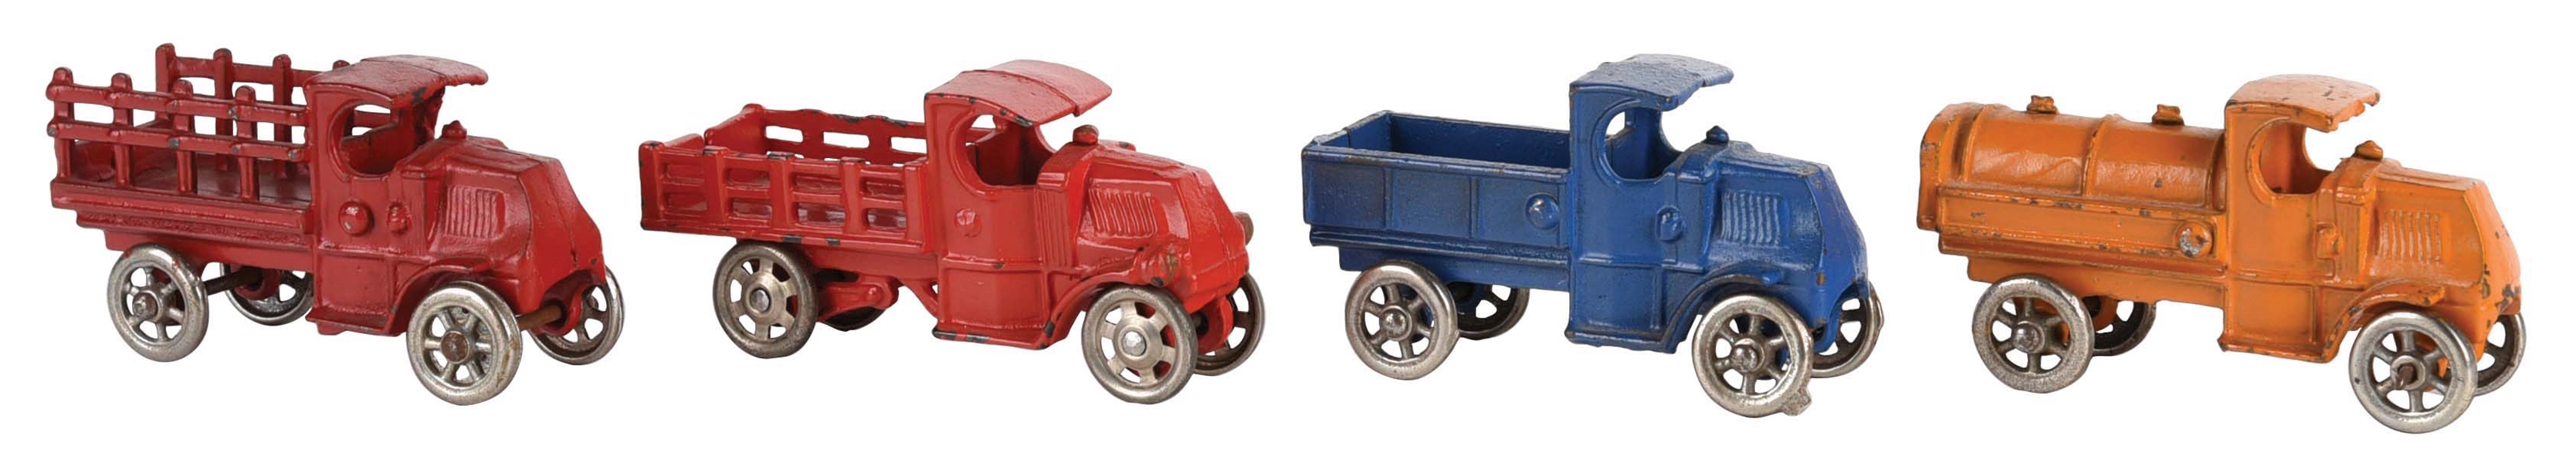 LOT OF 4: AMERICAN MADE CAST-IRON MACK FRONT TRUCK TOYS.